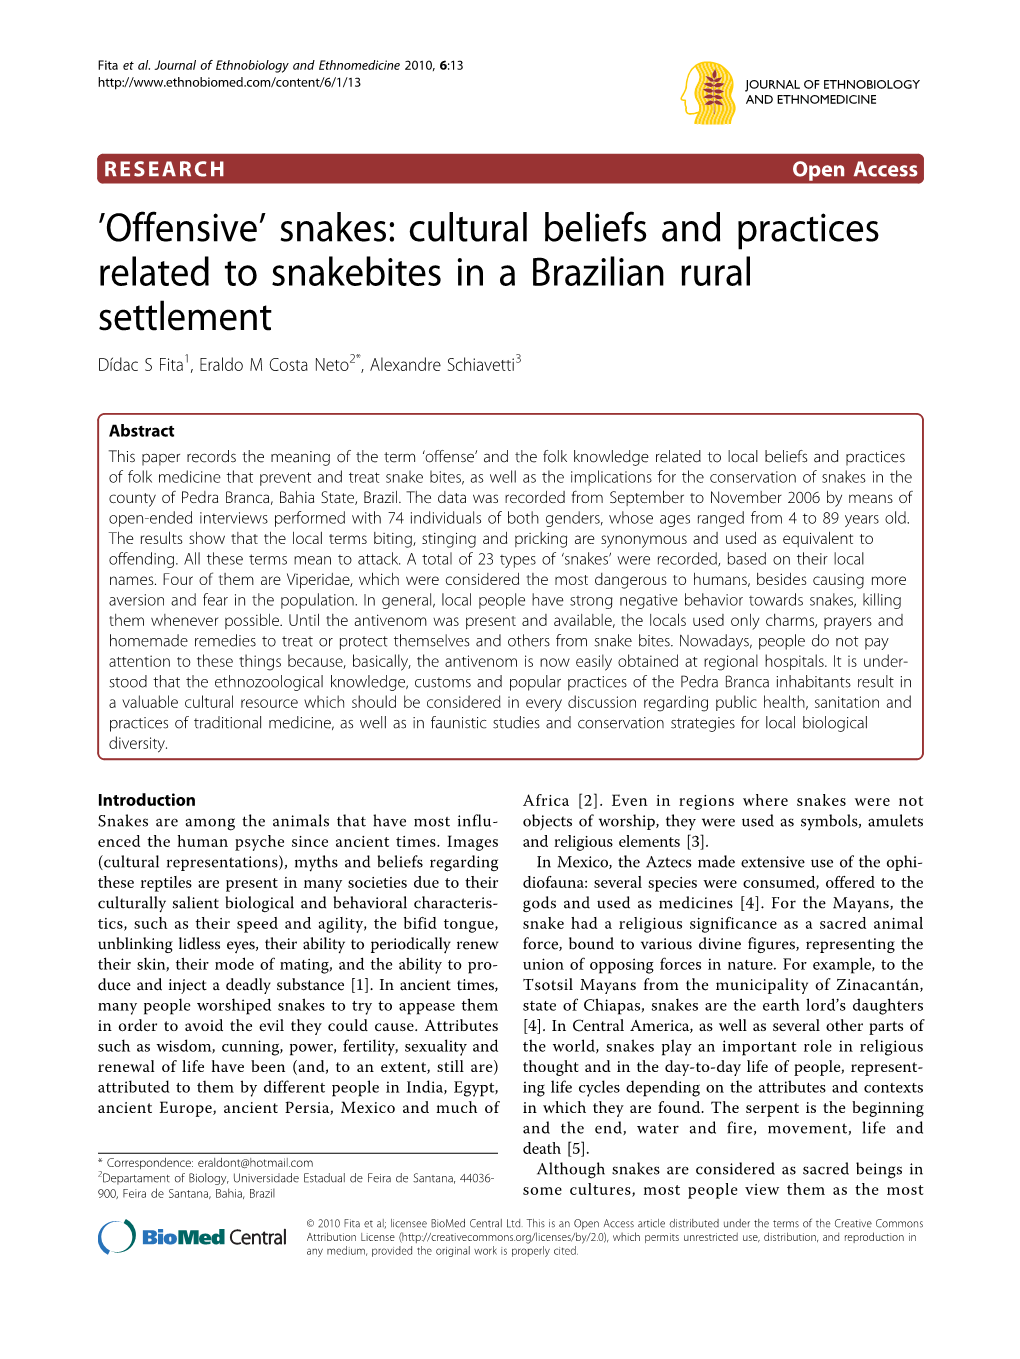 Snakes: Cultural Beliefs and Practices Related to Snakebites in a Brazilian Rural Settlement Dídac S Fita1, Eraldo M Costa Neto2*, Alexandre Schiavetti3